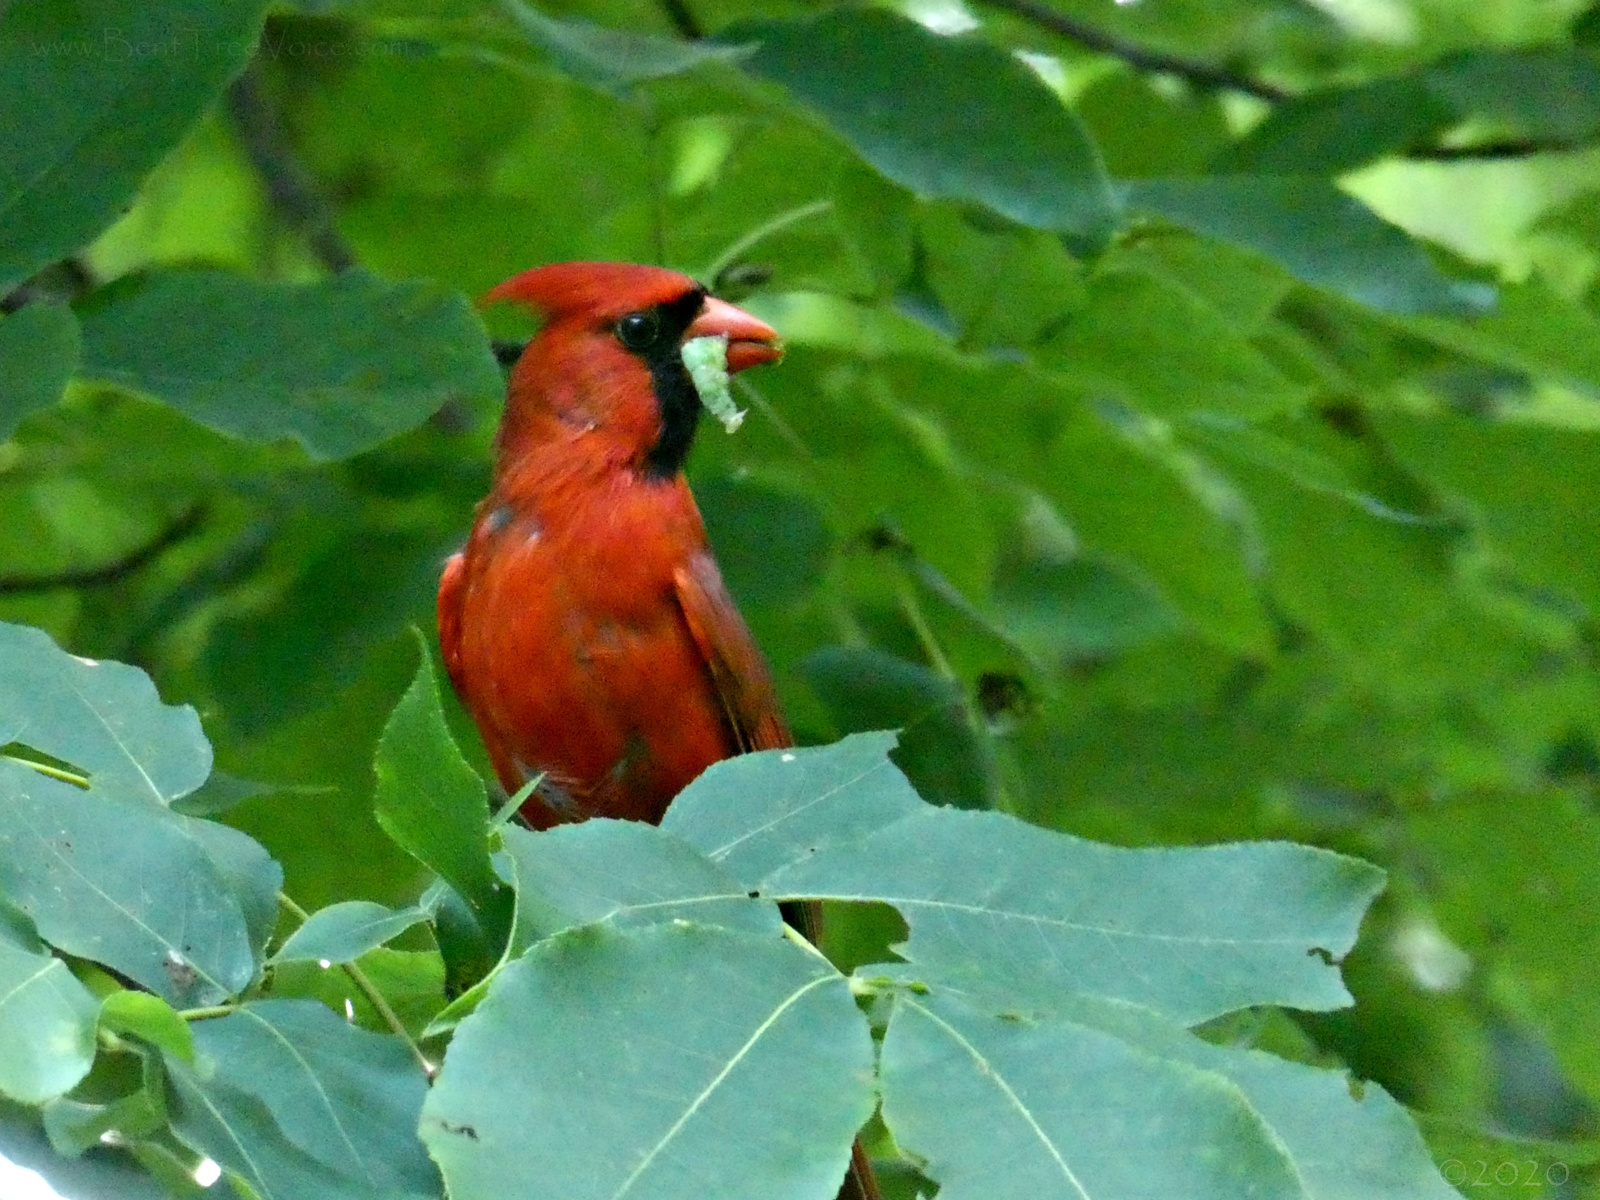 July 15, 2020 - Cardinal in Bent Tree